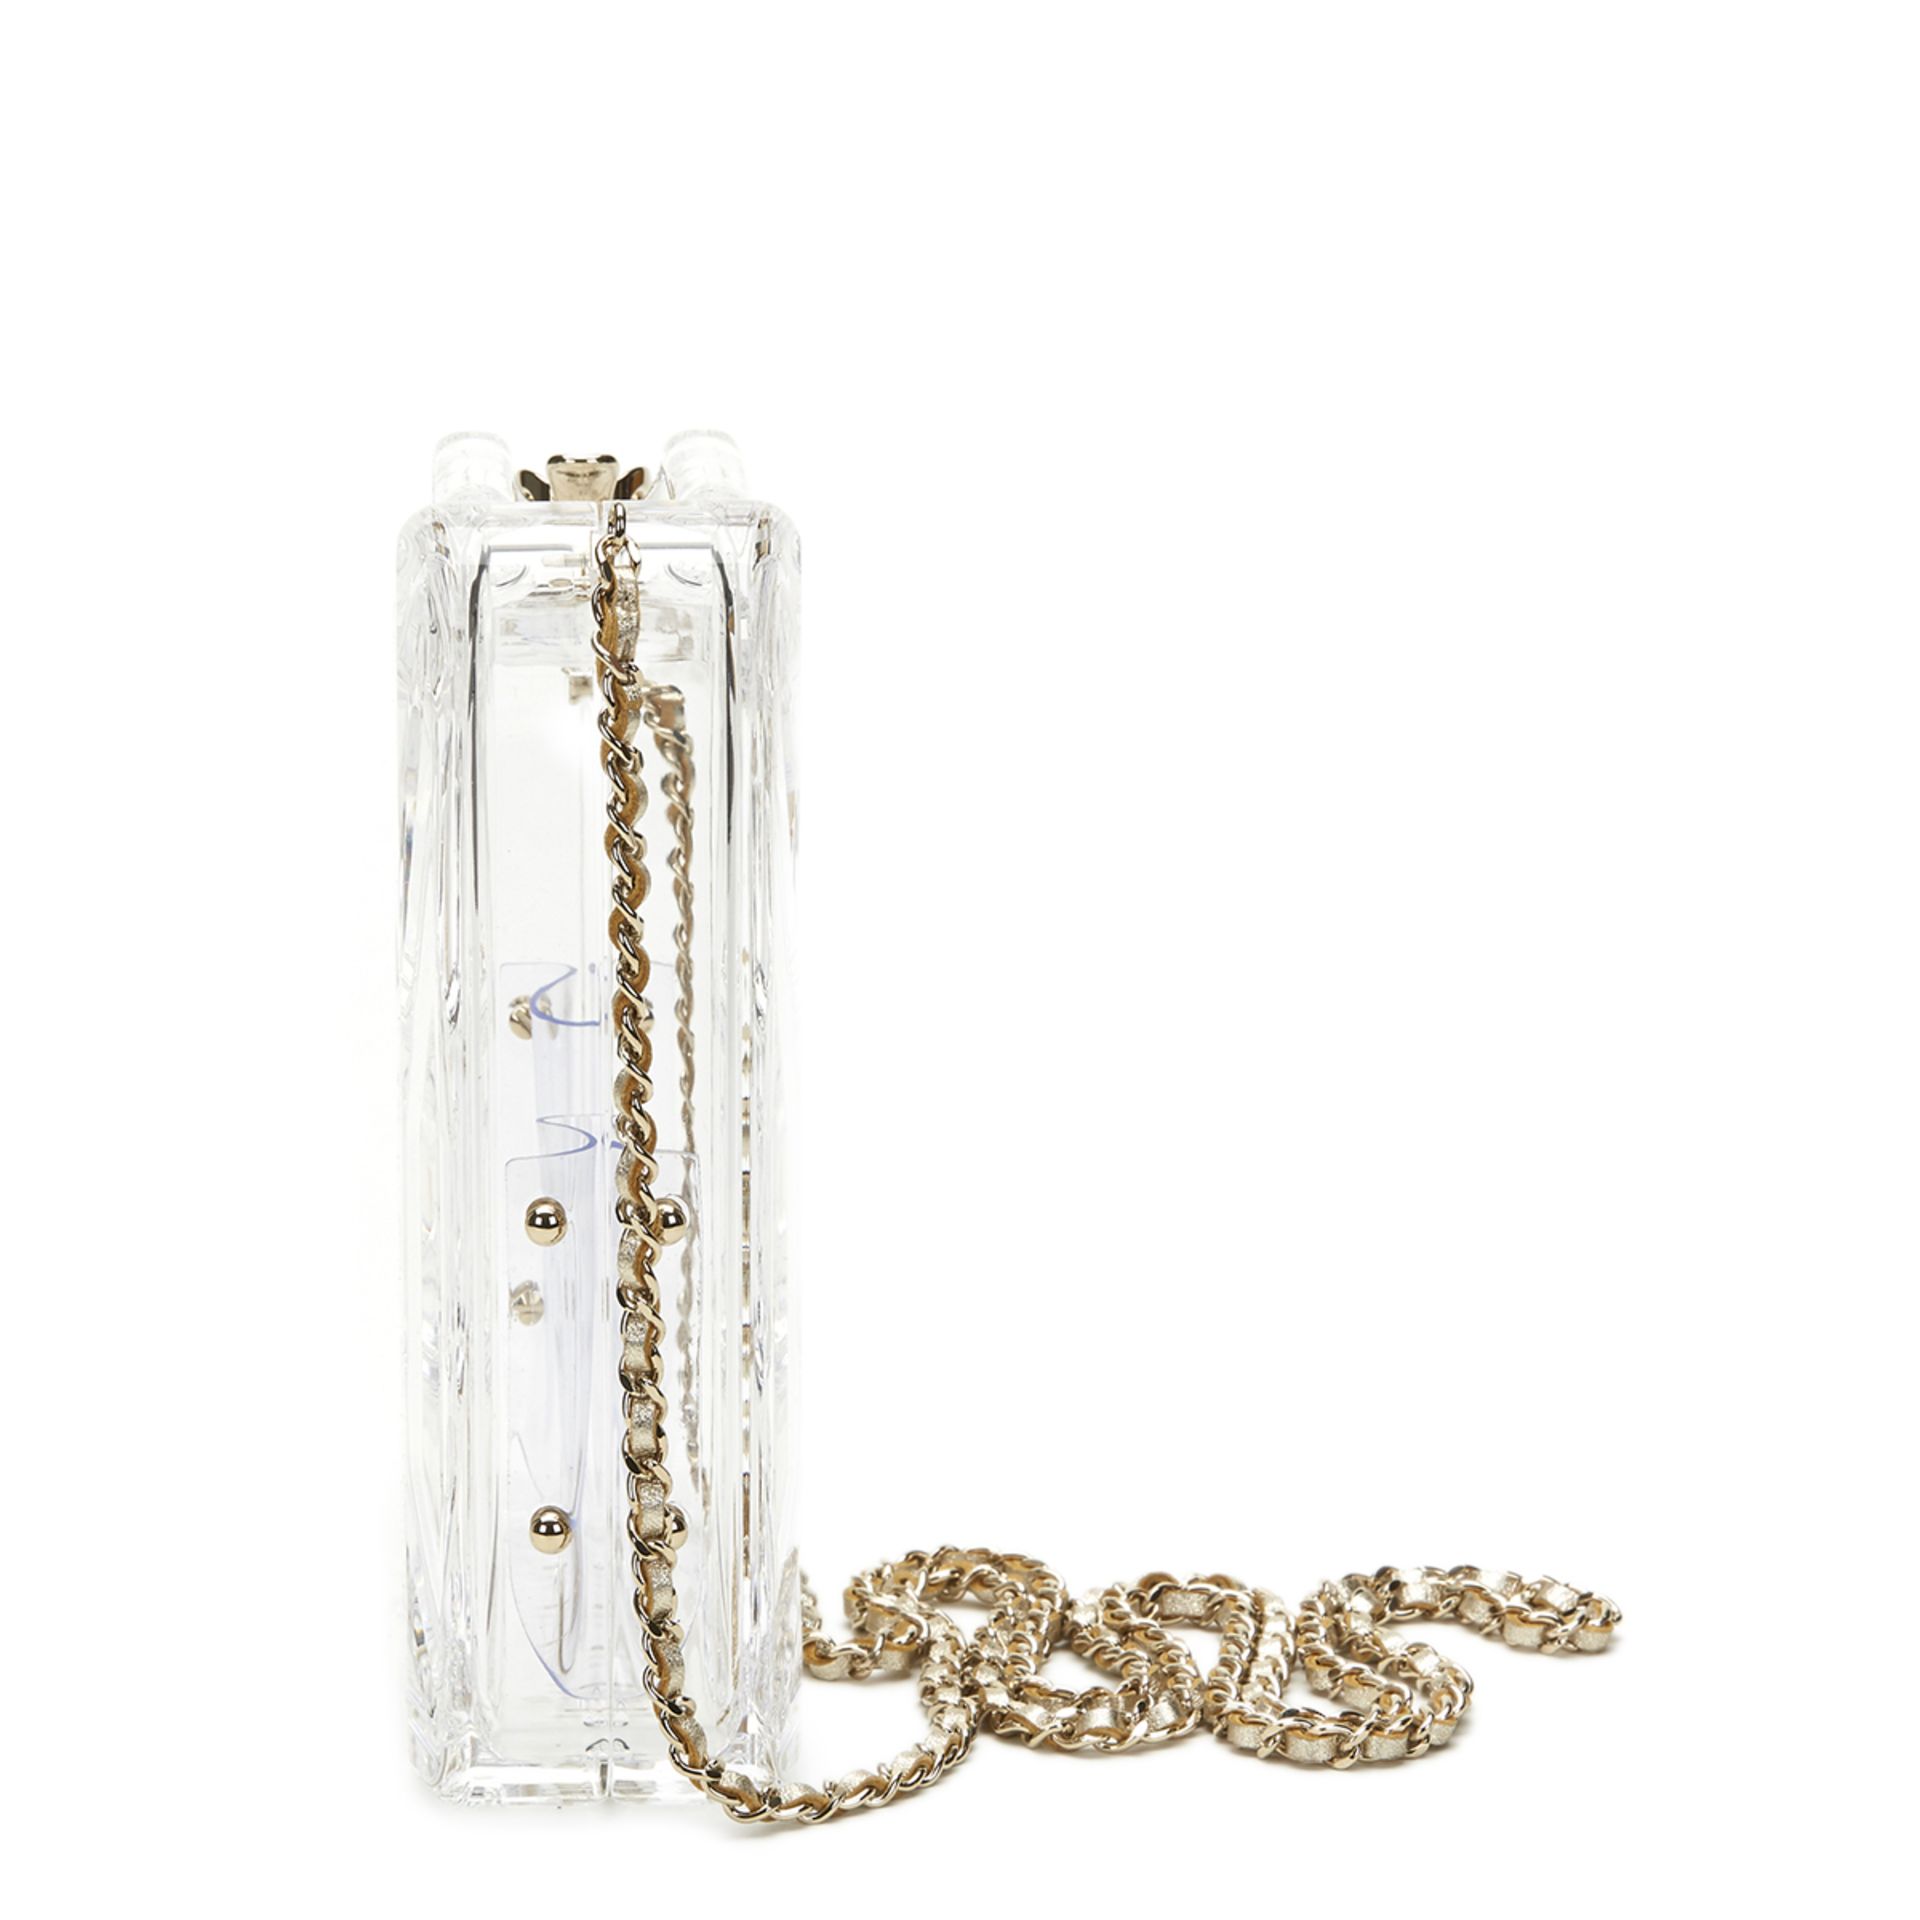 Chanel Gas Can Minaudiere - Image 5 of 13